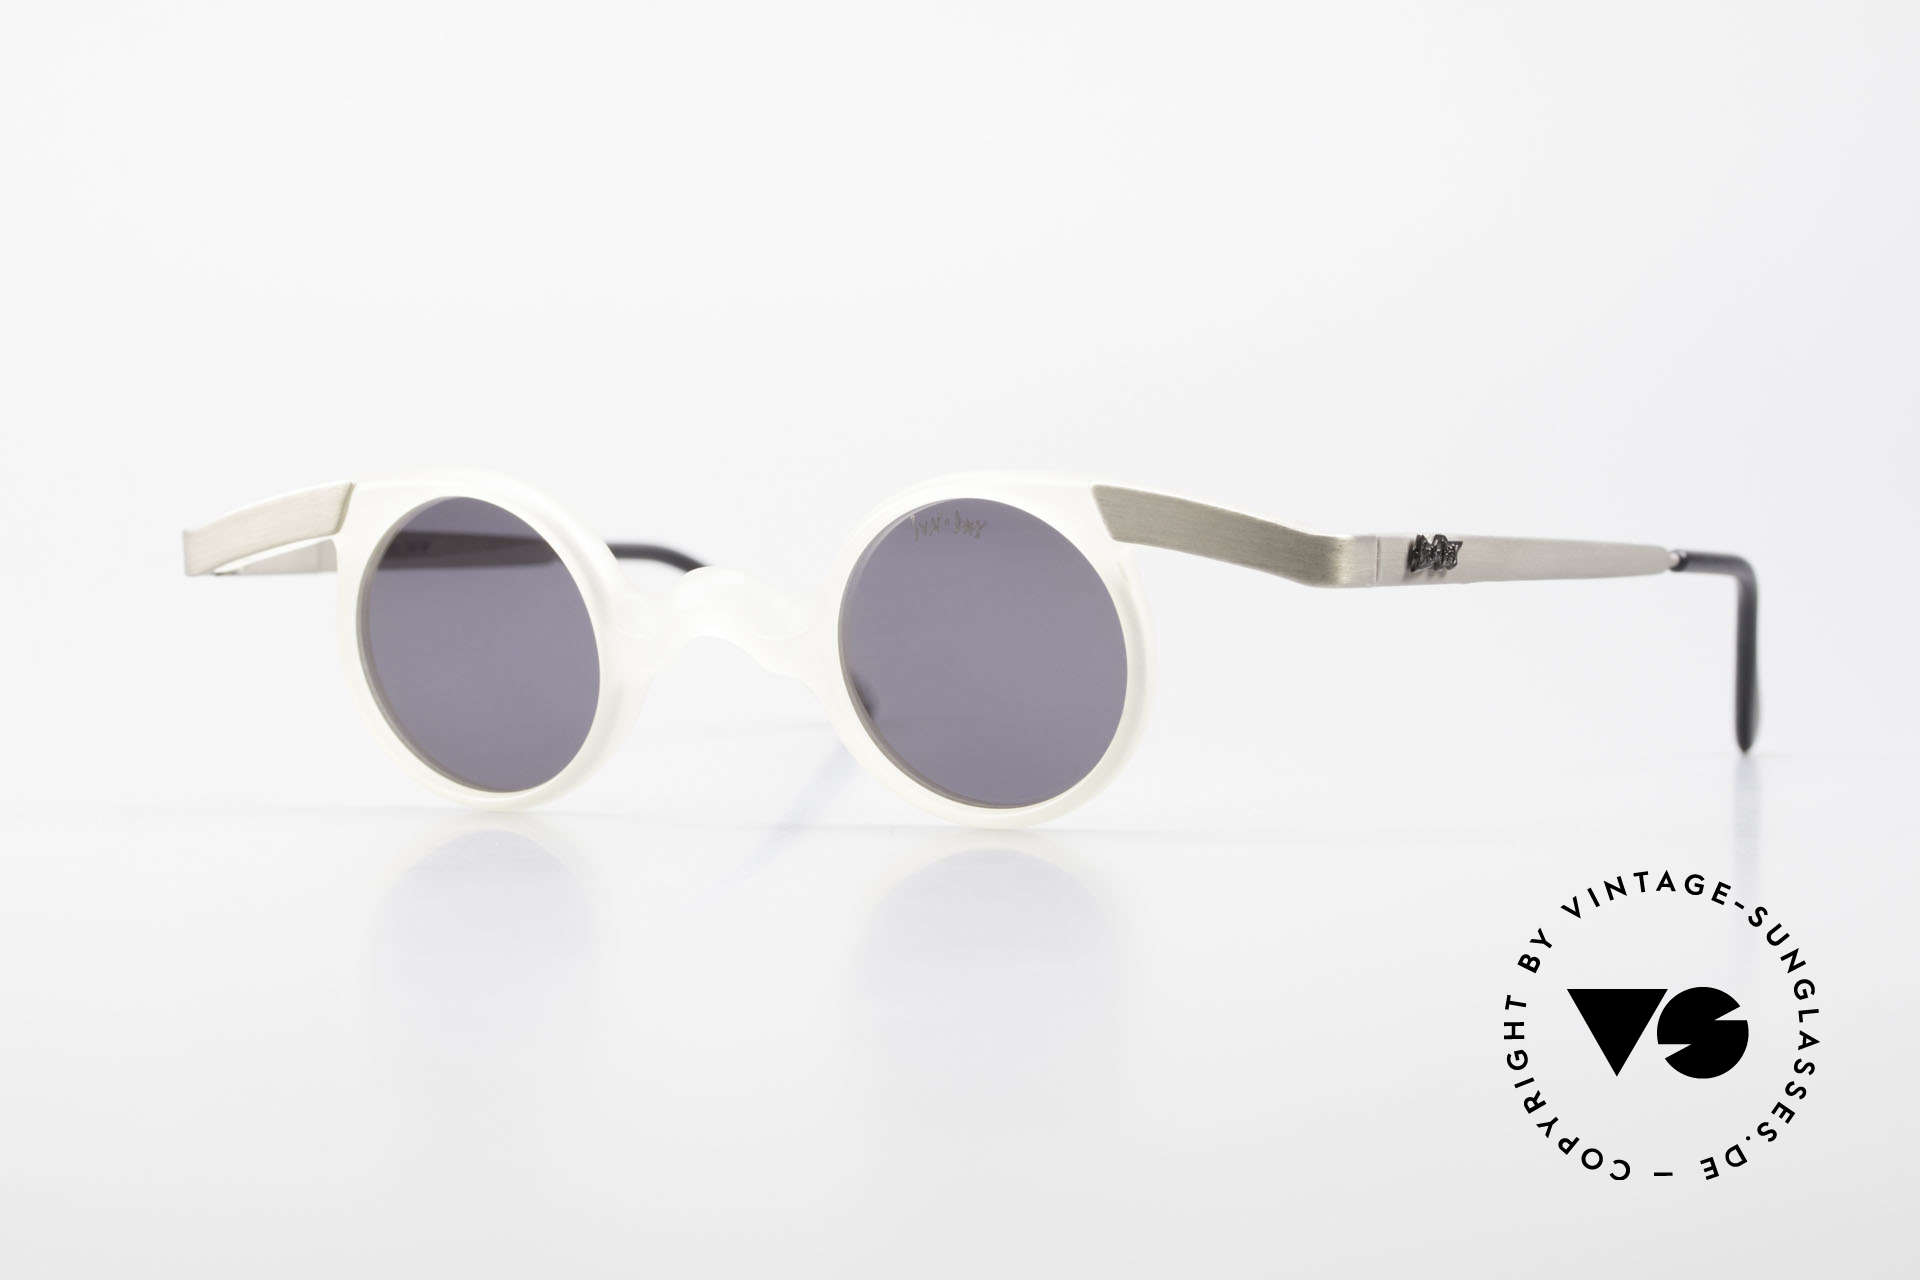 Sunboy SB39 Vintage No Retro Sunglasses, something different (an art frame for individualist), Made for Men and Women